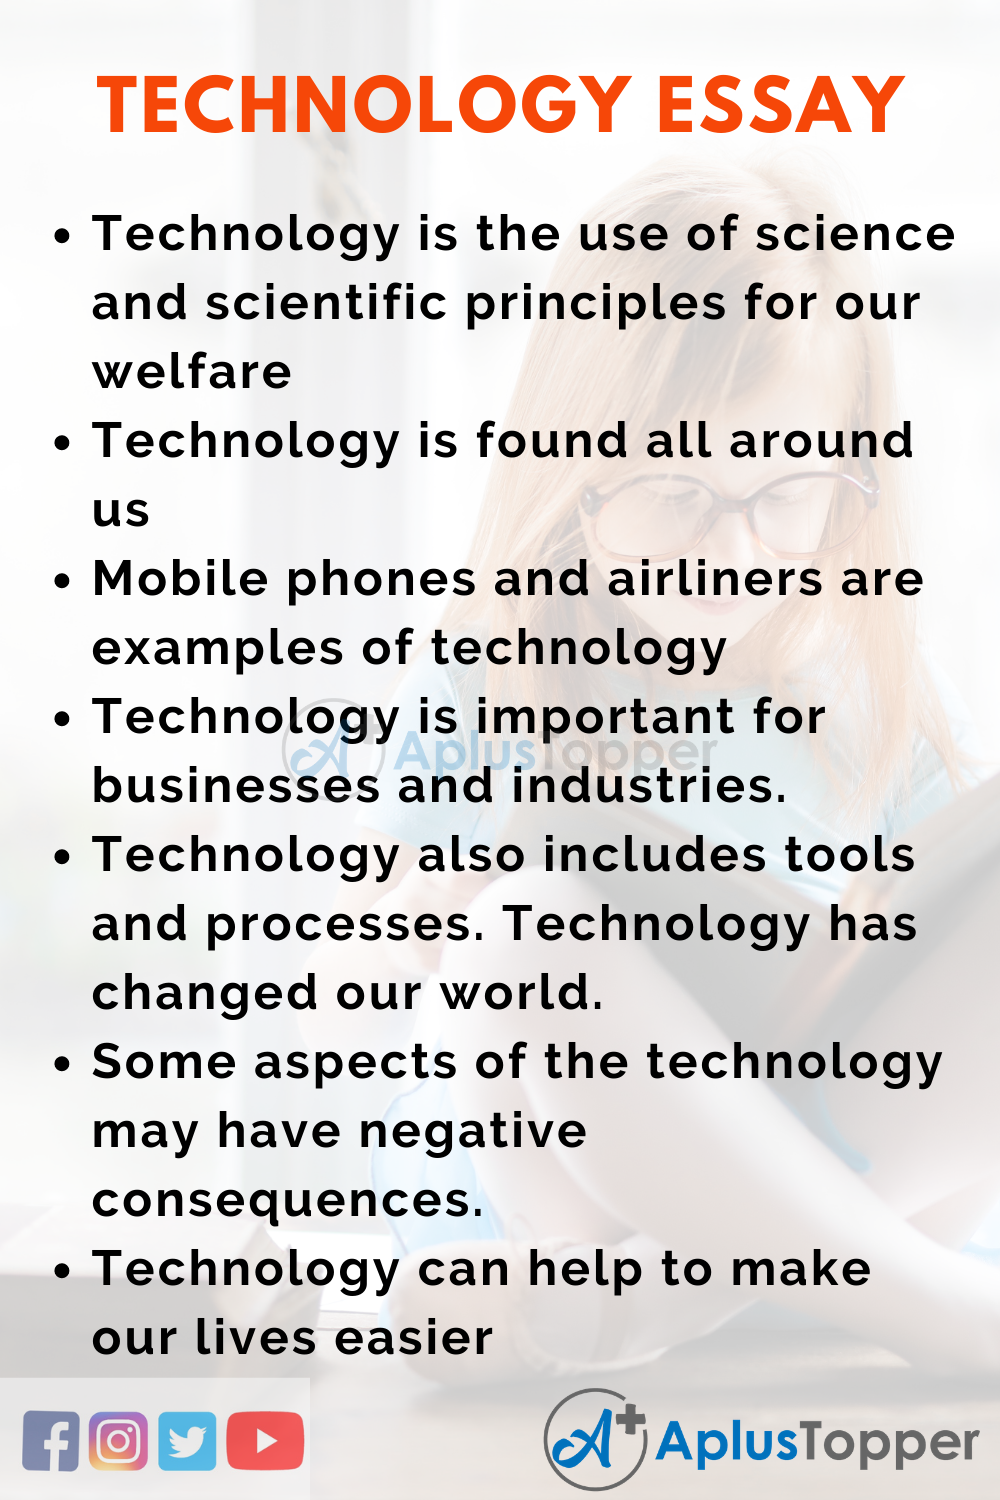 write an essay about the advantages of technology in education